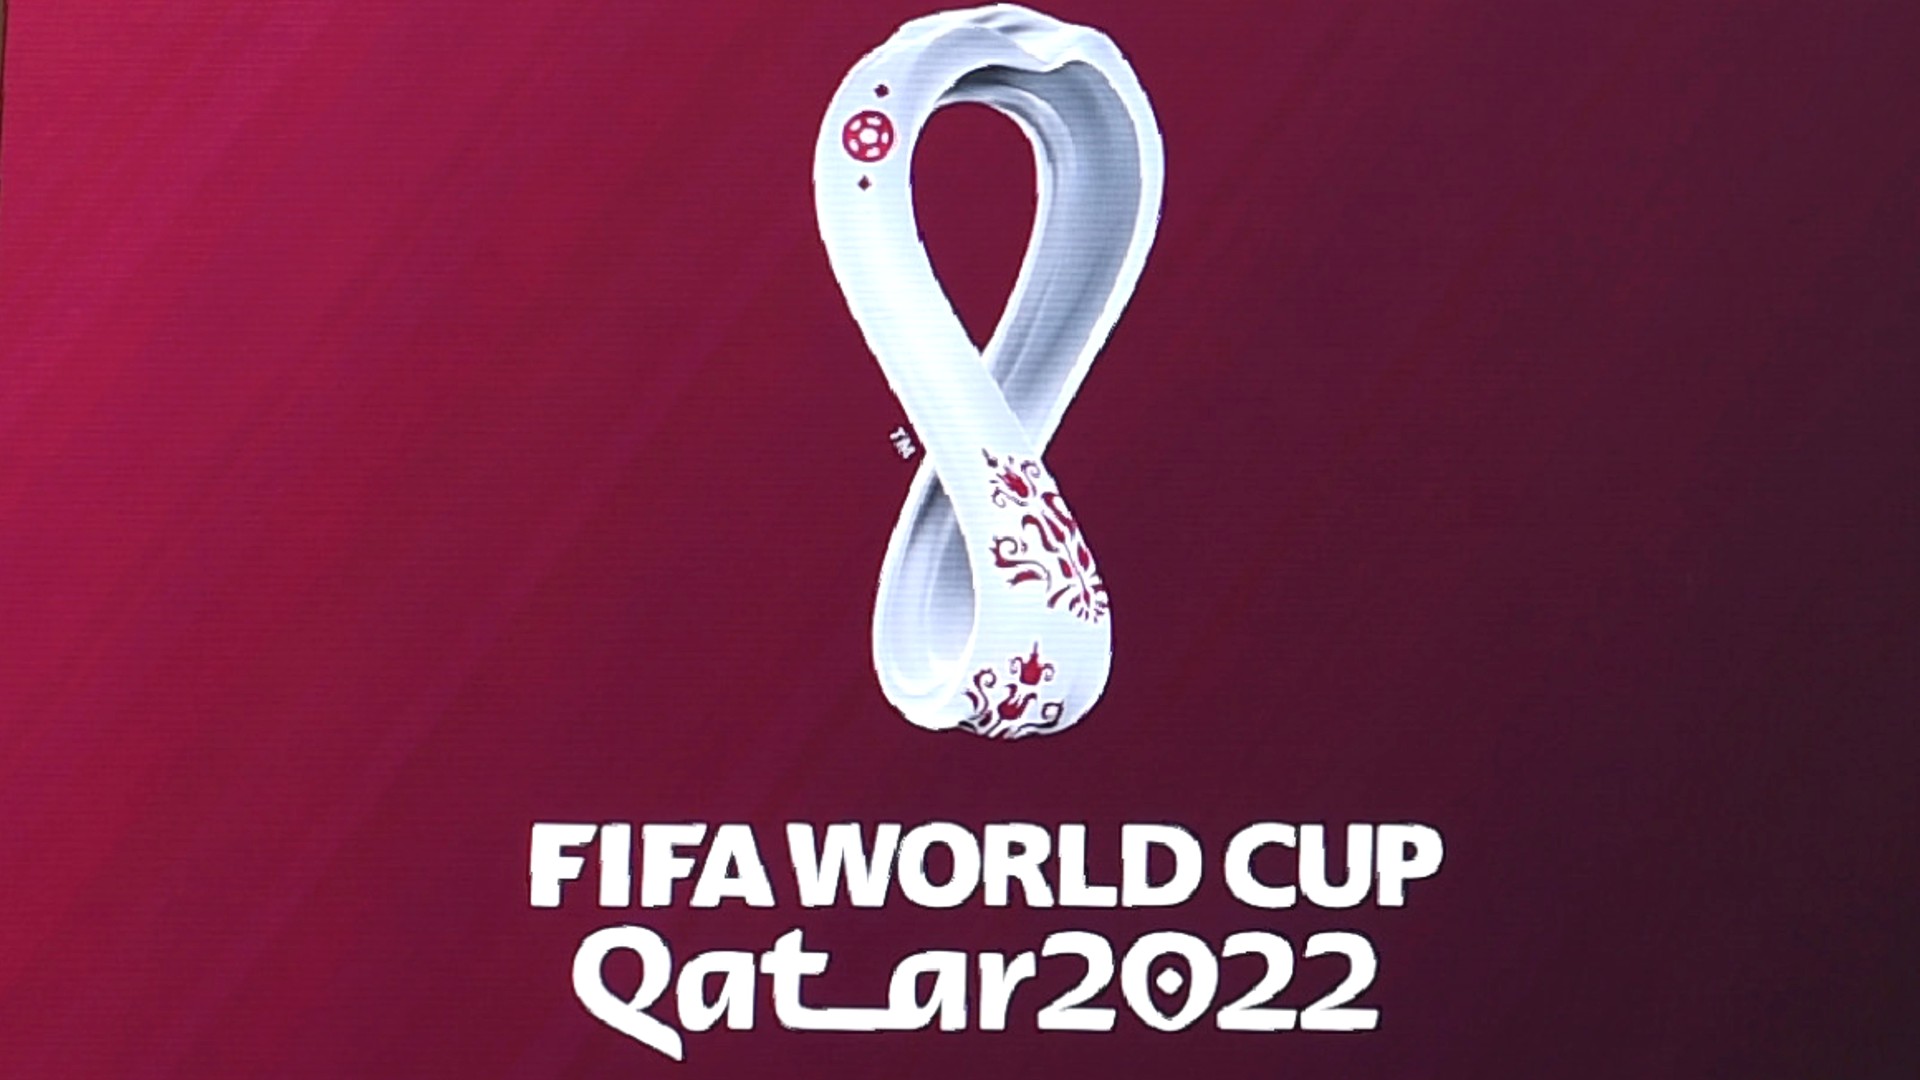 2022 fifa world cup qualification